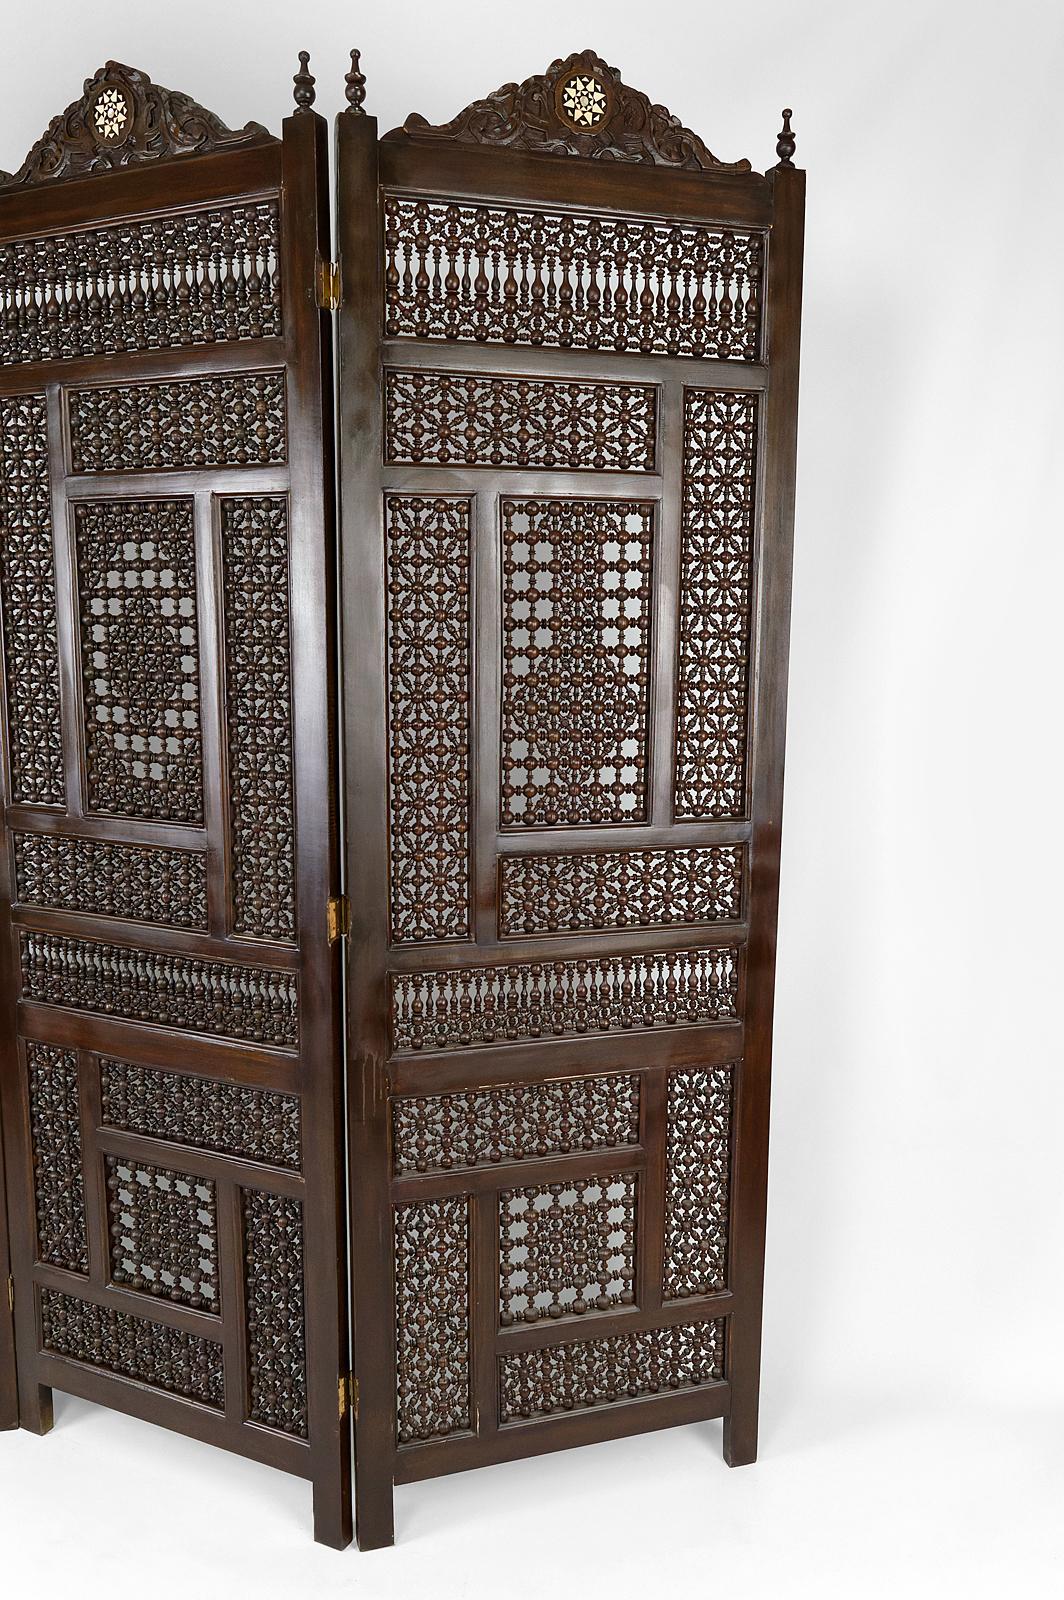 Carved Moucharabieh folding screen / room divider / paravent, Egypt, 19th Century